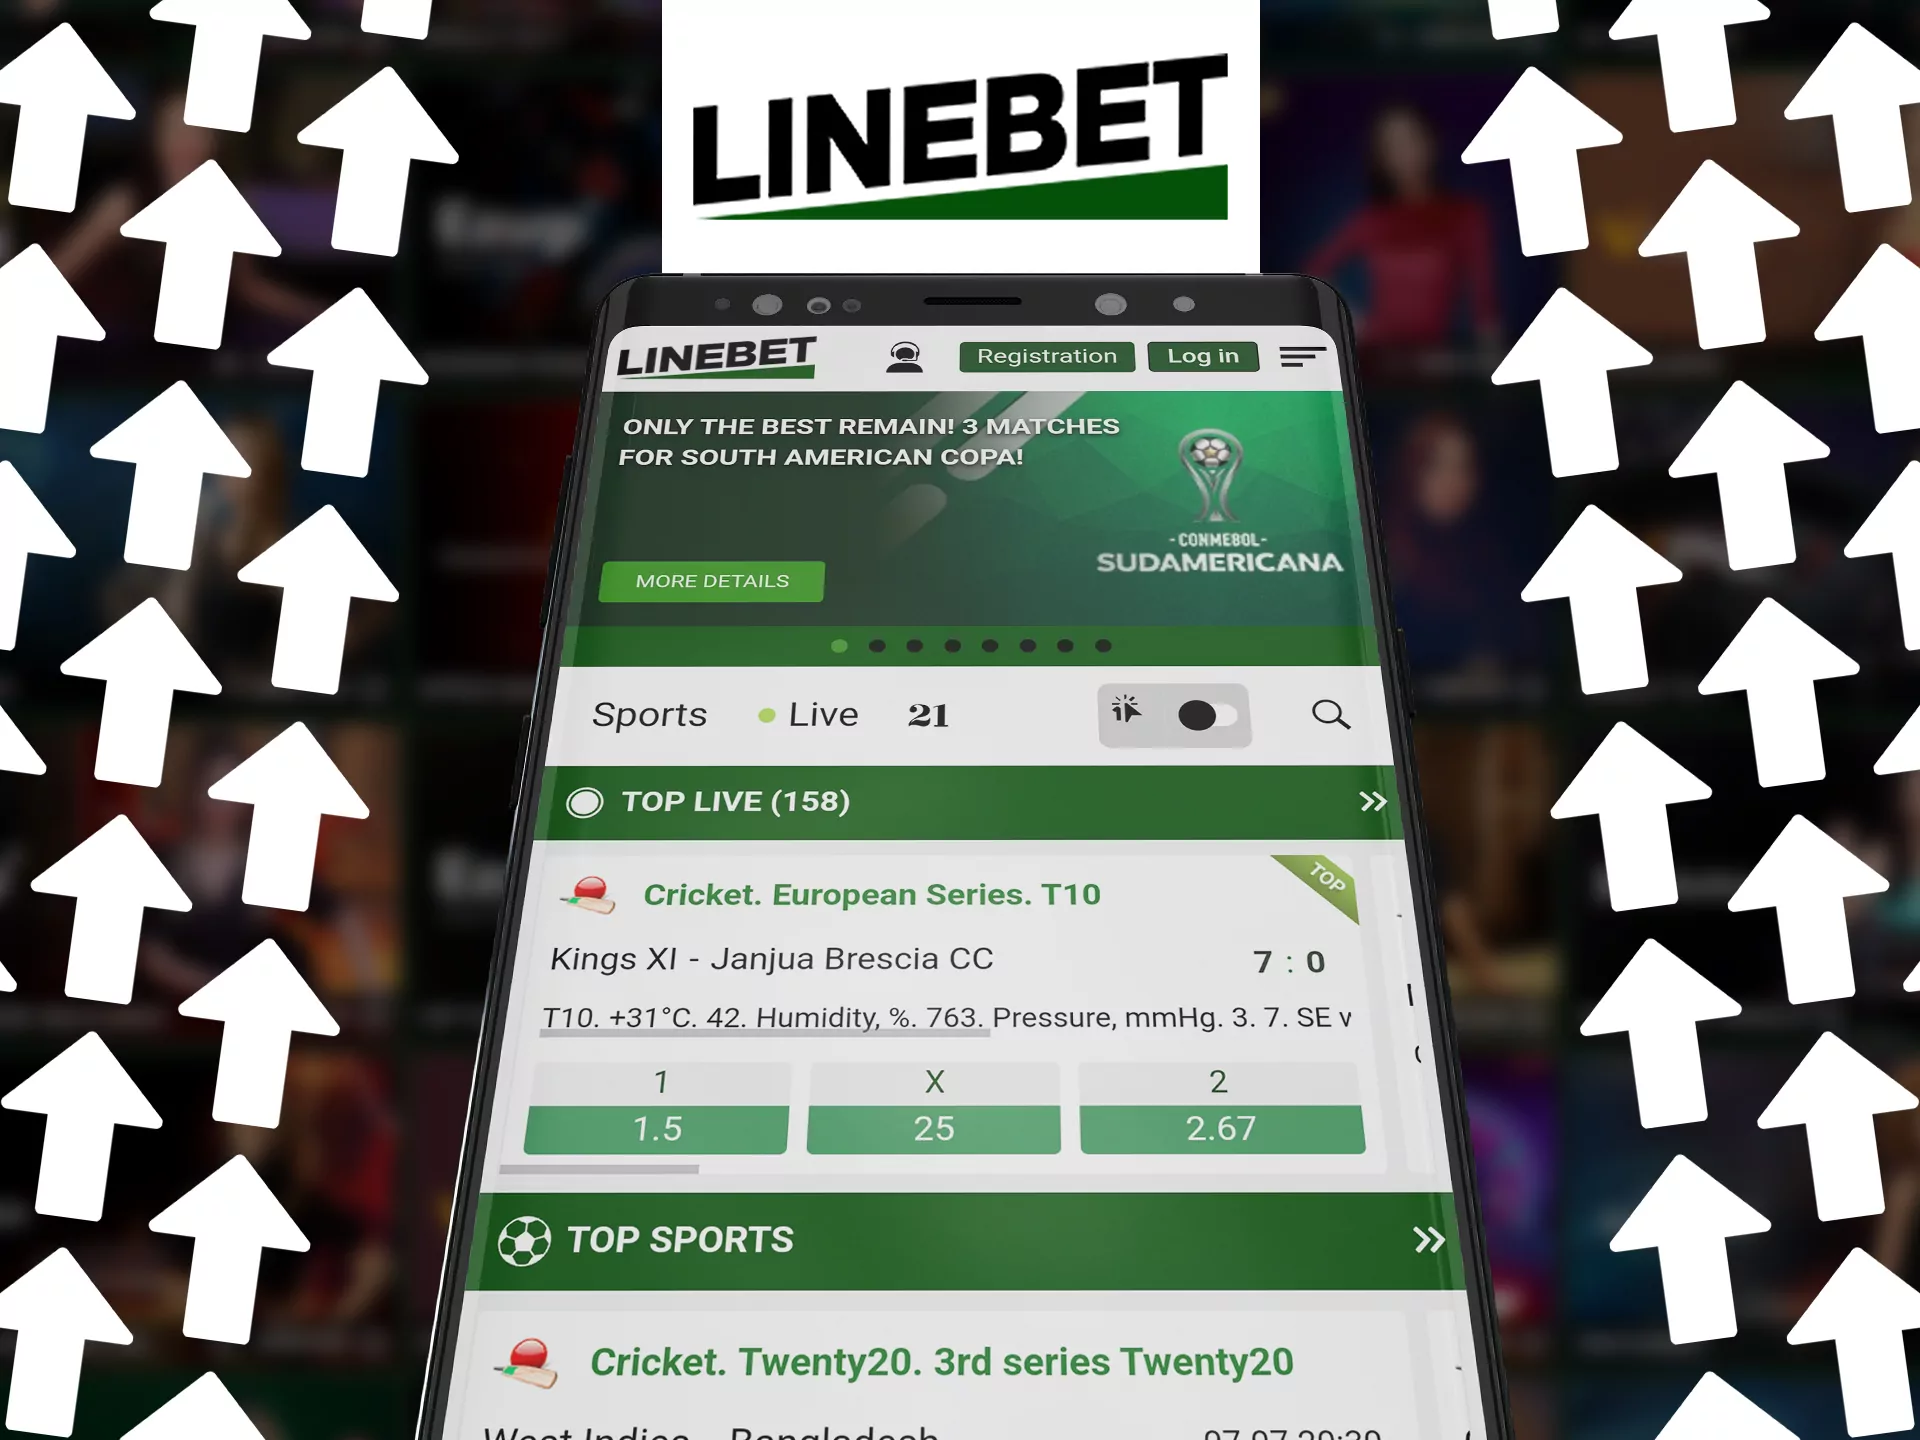 Linebet app can update without any commands.